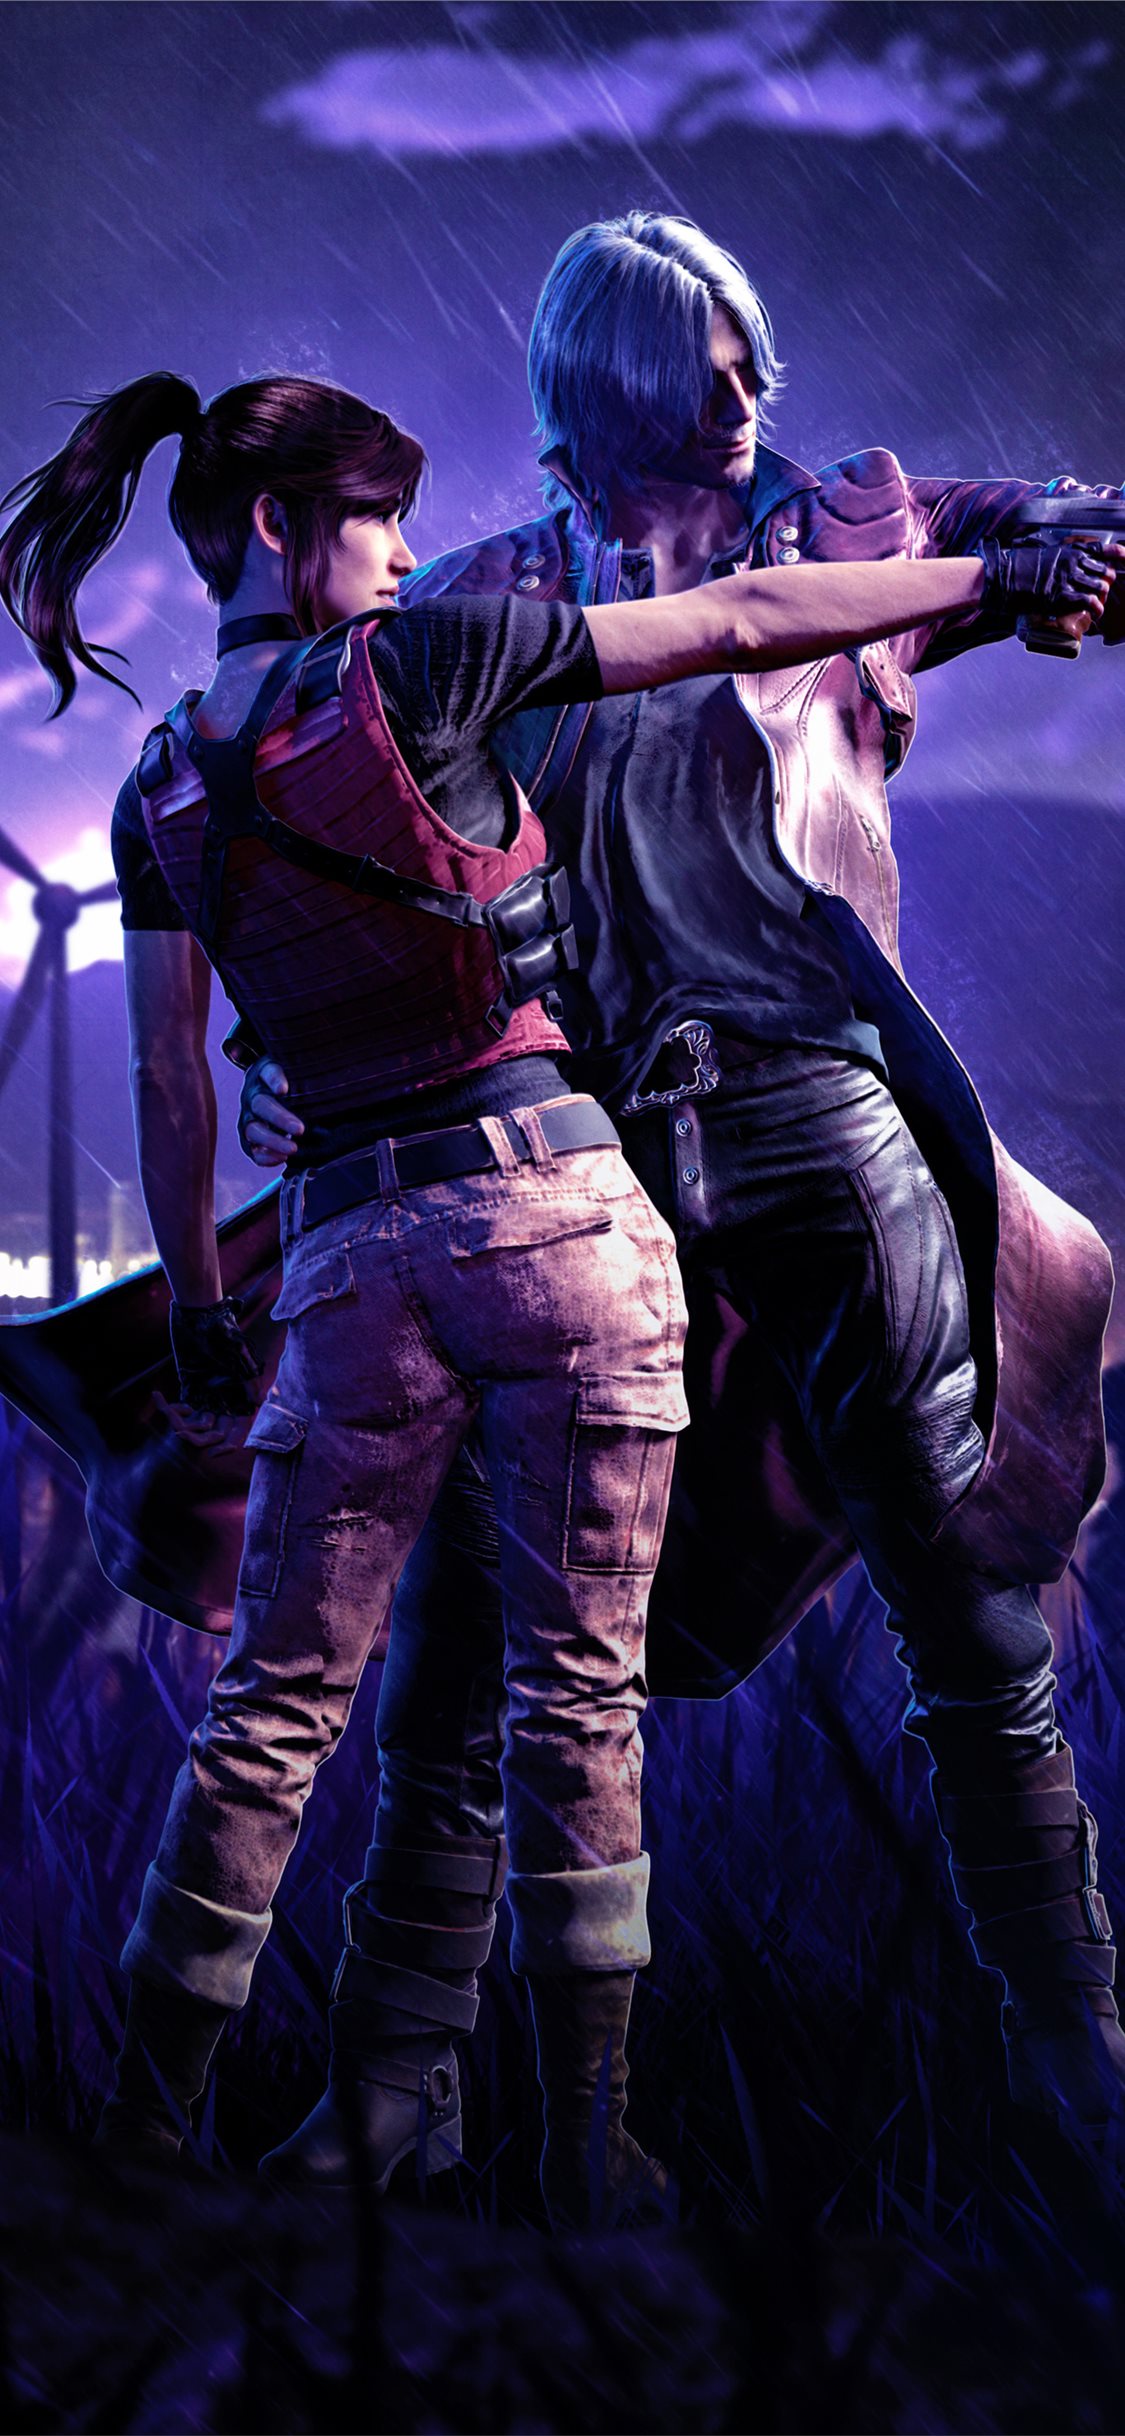 resident evil devil may cry 5 5k iPhone 11 Wallpapers Free Download